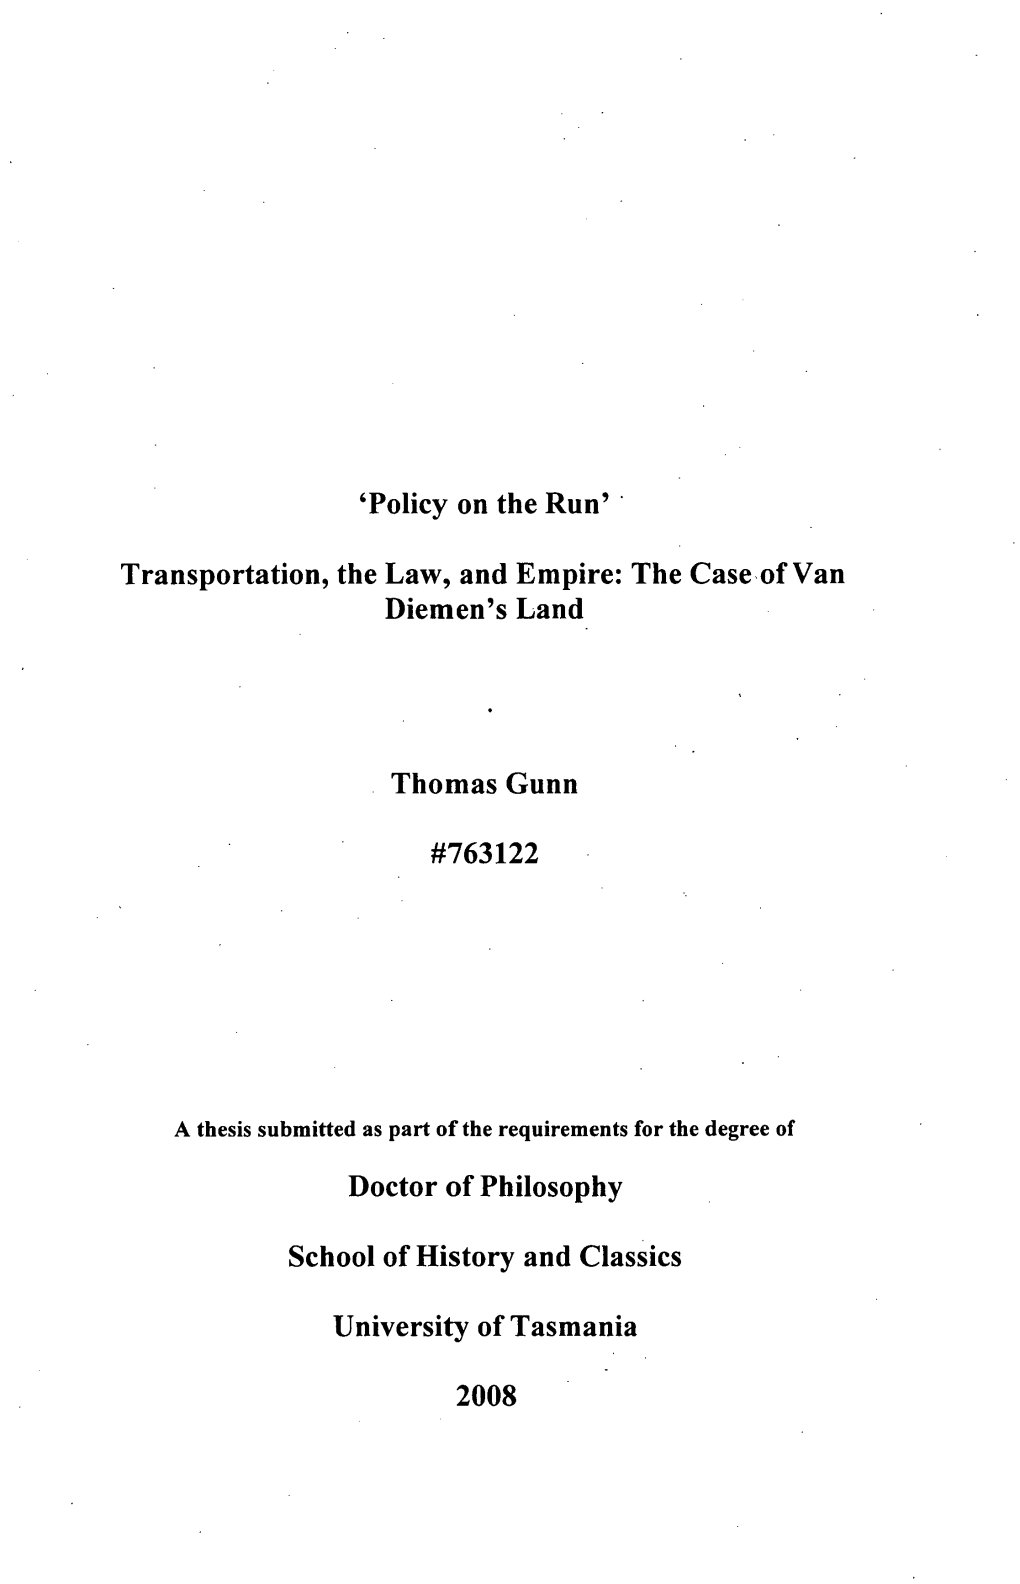 Transportation, the Law, and Empire : the Case of Van Diemen's Land